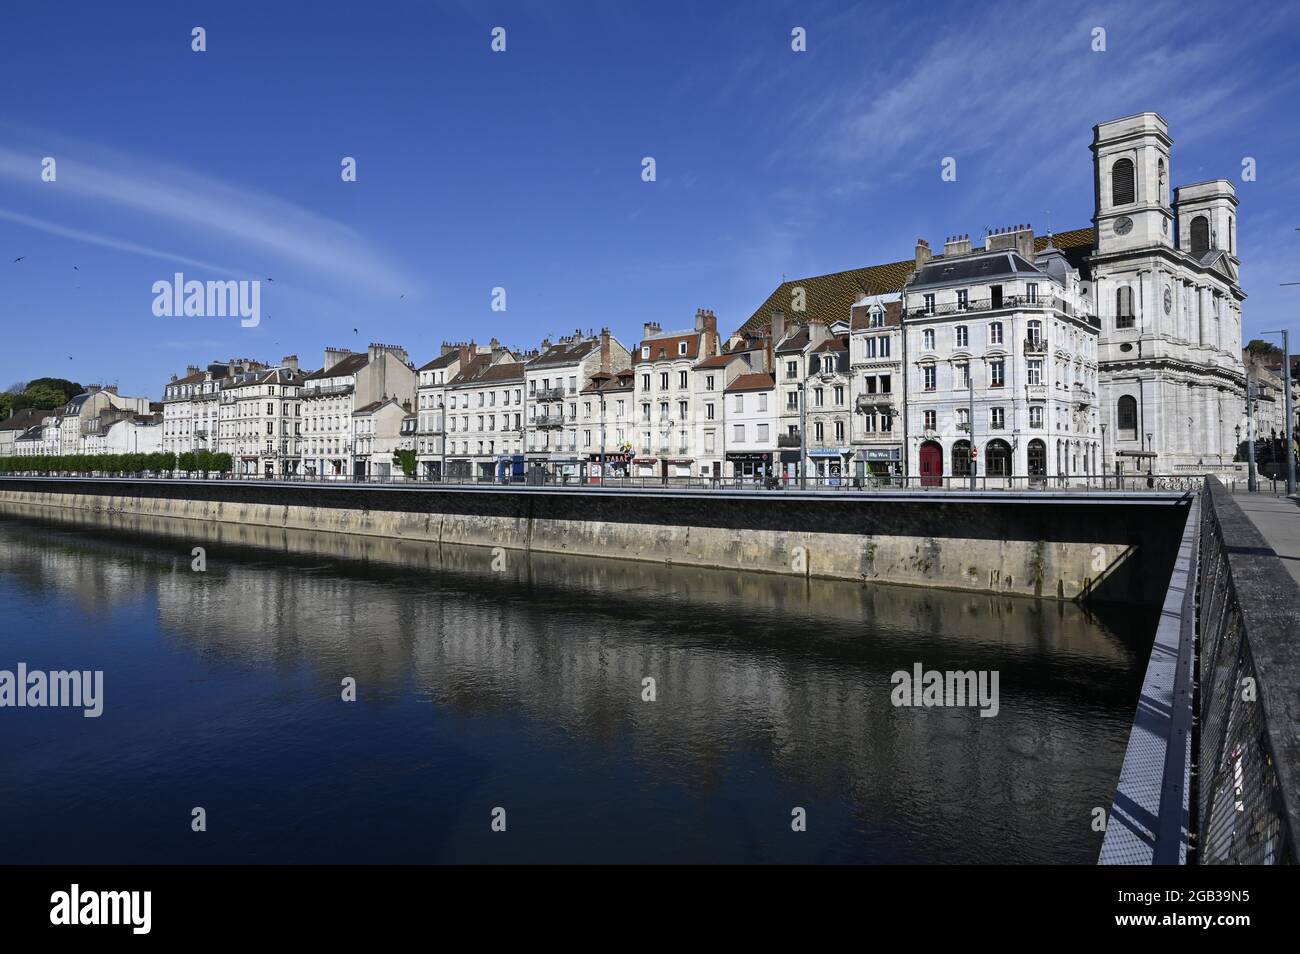 View across the Doubs river from the Battant bridge to the Battant quarter, Besançon, France Stock Photo